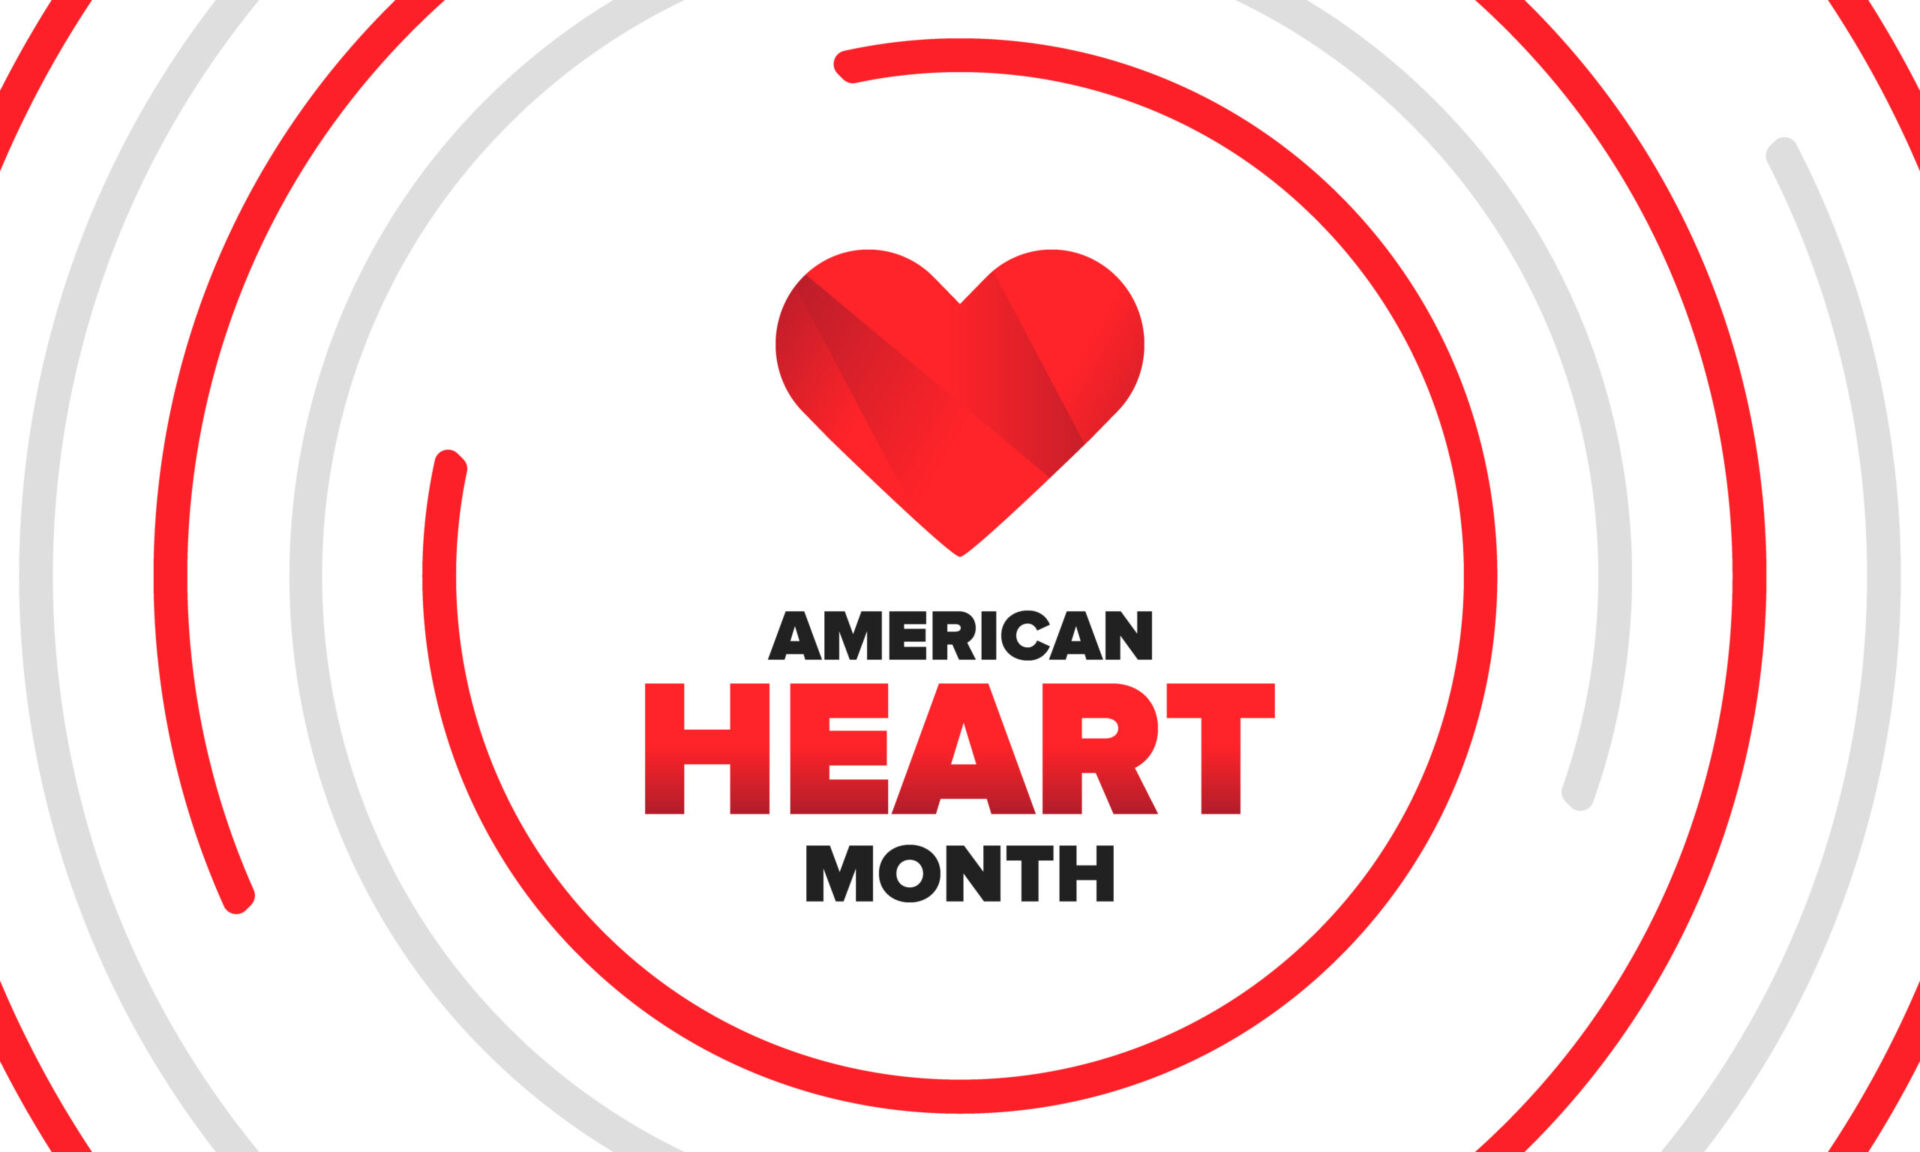 American Heart Month Prevention Tips Care on Location